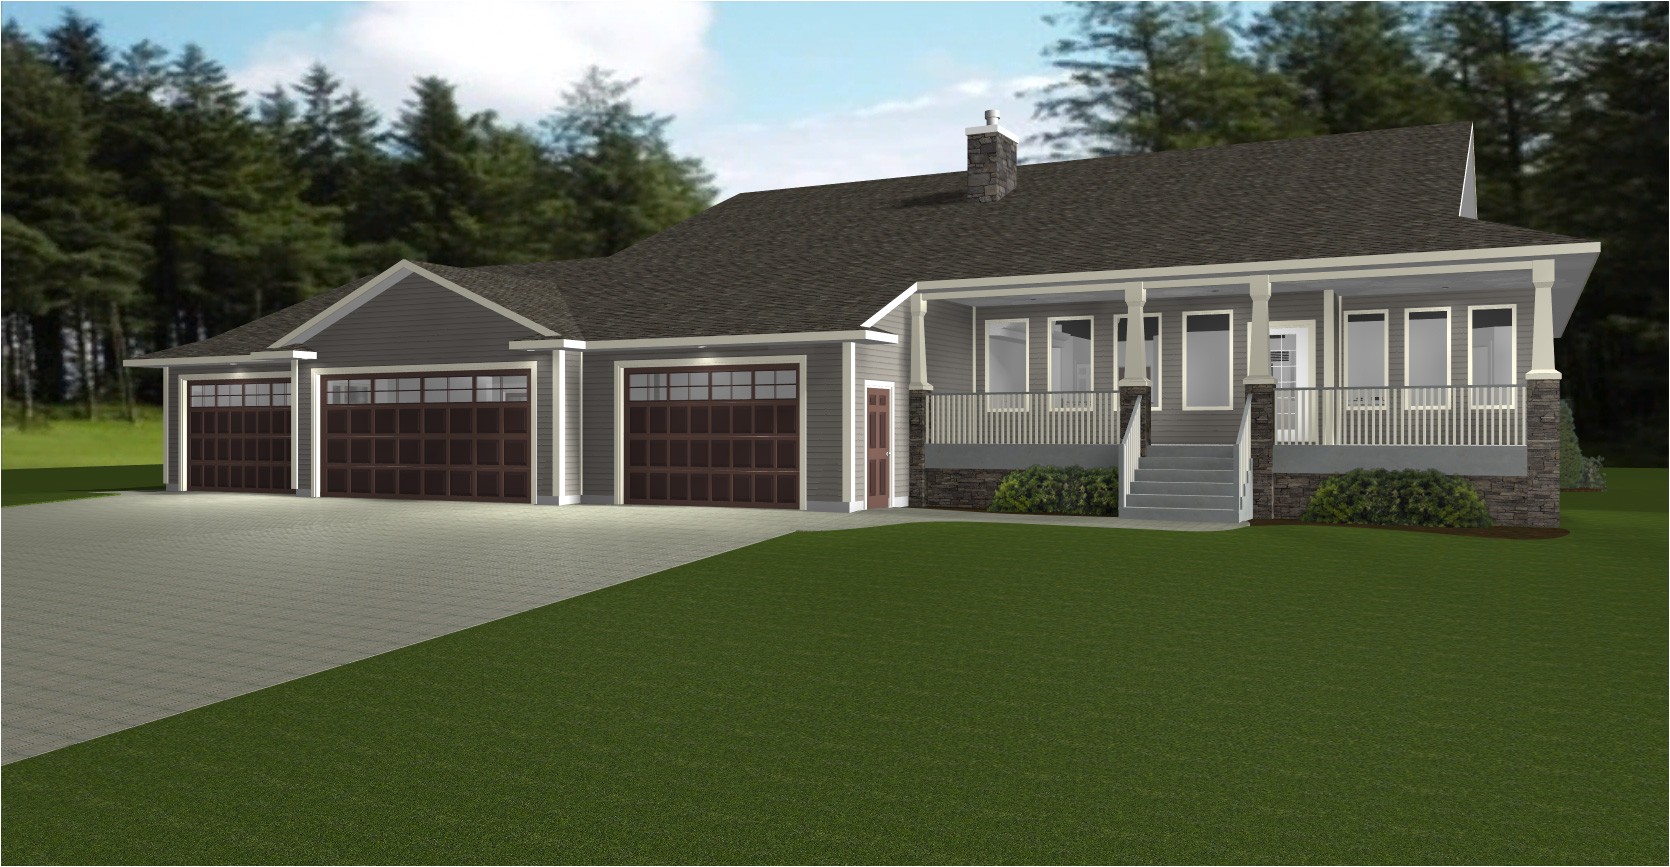 Ranch Style Home Plans with 3 Car Garage Nice House Plans with 3 Car Garage 4 Ranch Style House